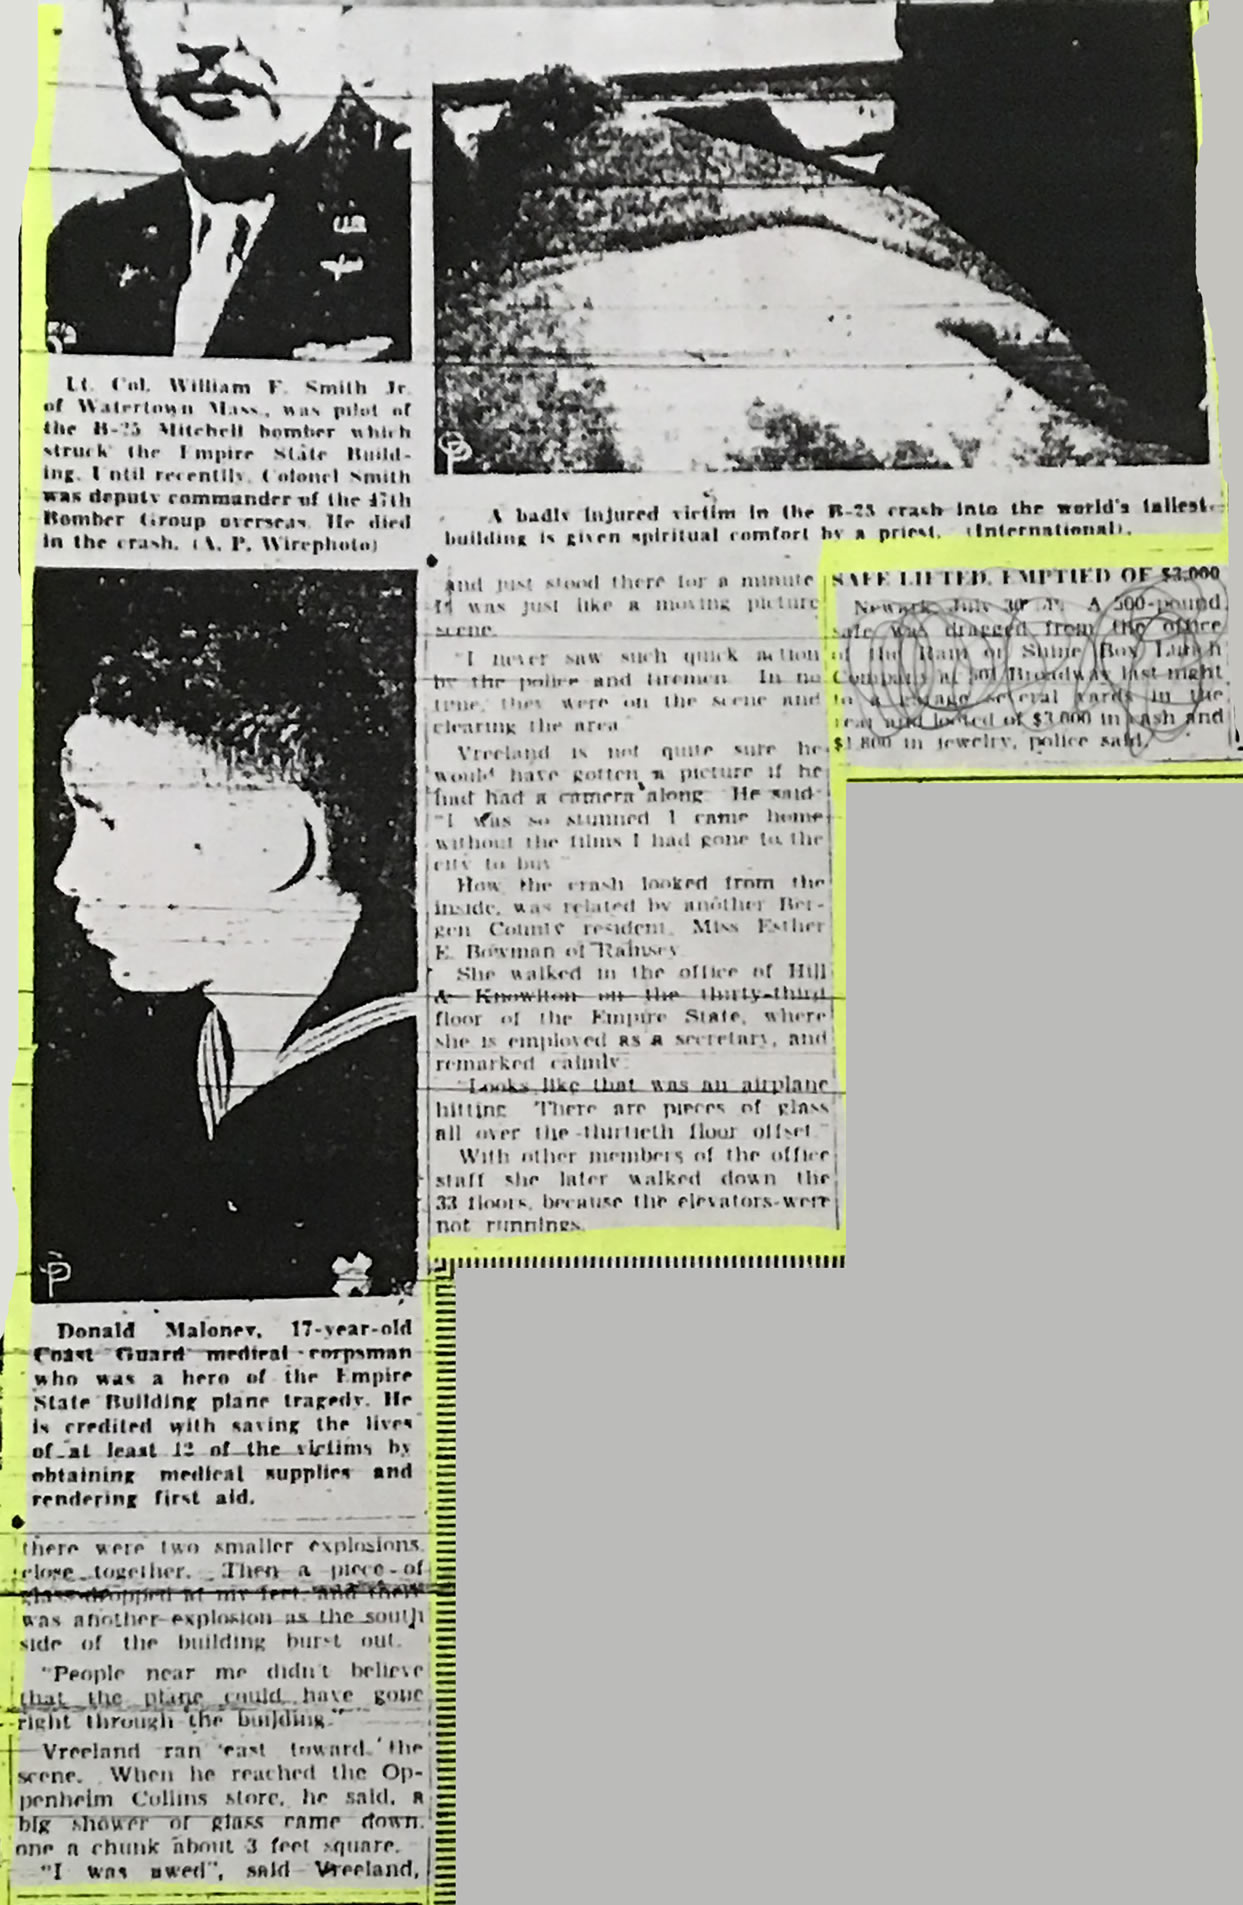 July 30 1945 Page 3 Column 2 Right